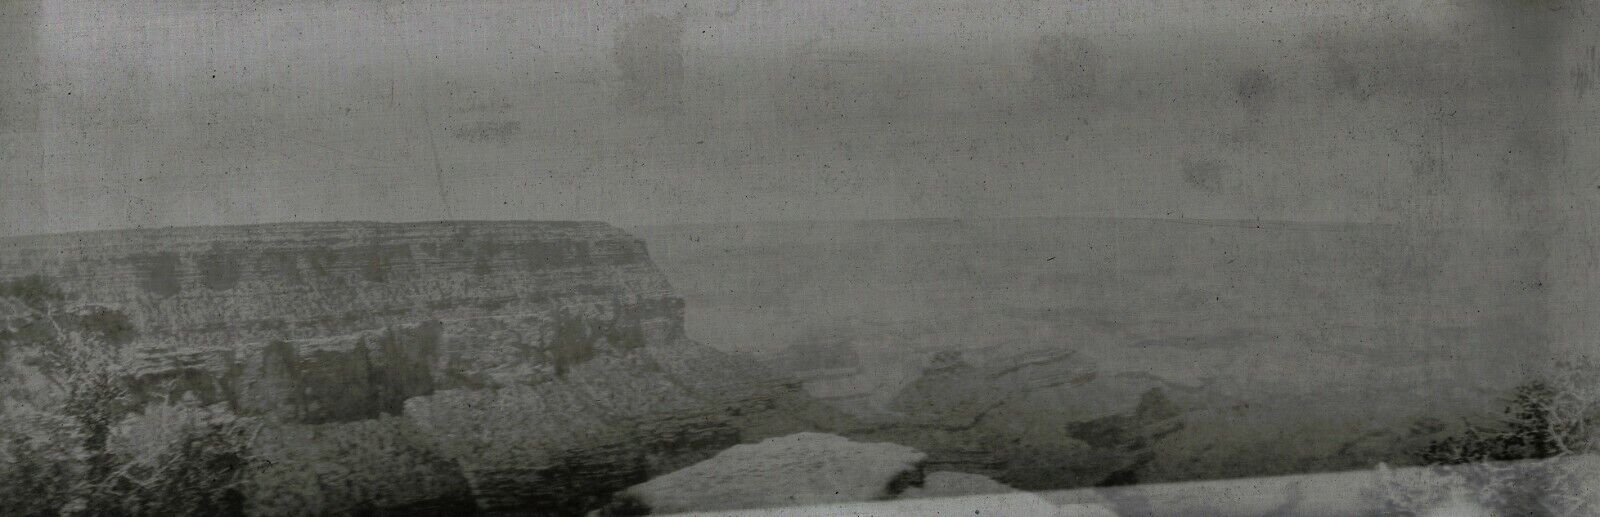 Antique Panoramic Grand Canyon Photo Negative, c1906 Rim Canyon Frontier America